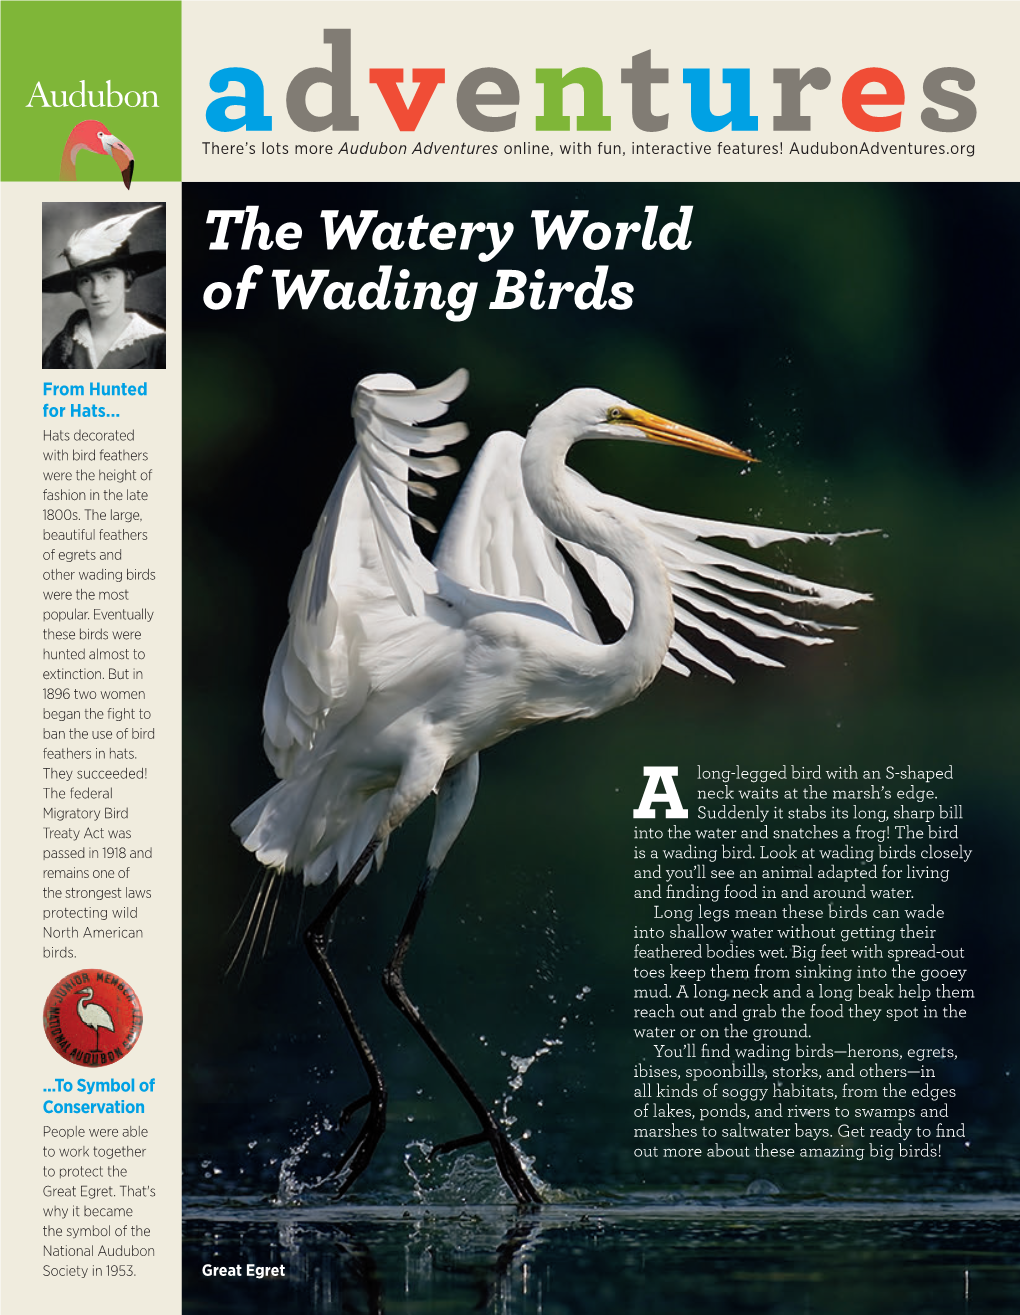 The Watery World of Wading Birds